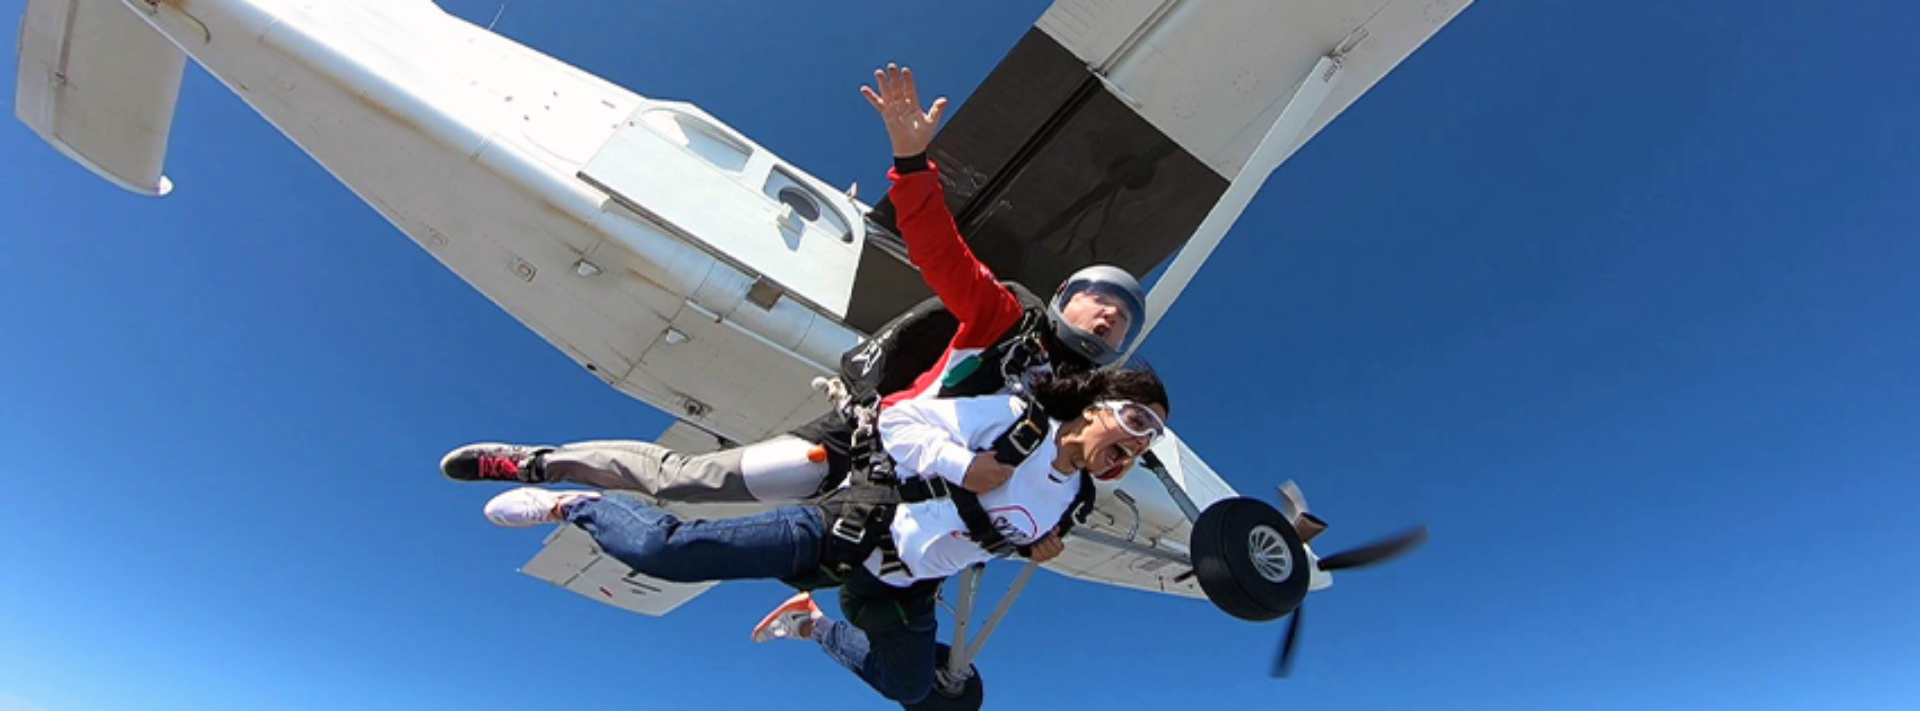 Skydiving Fermo